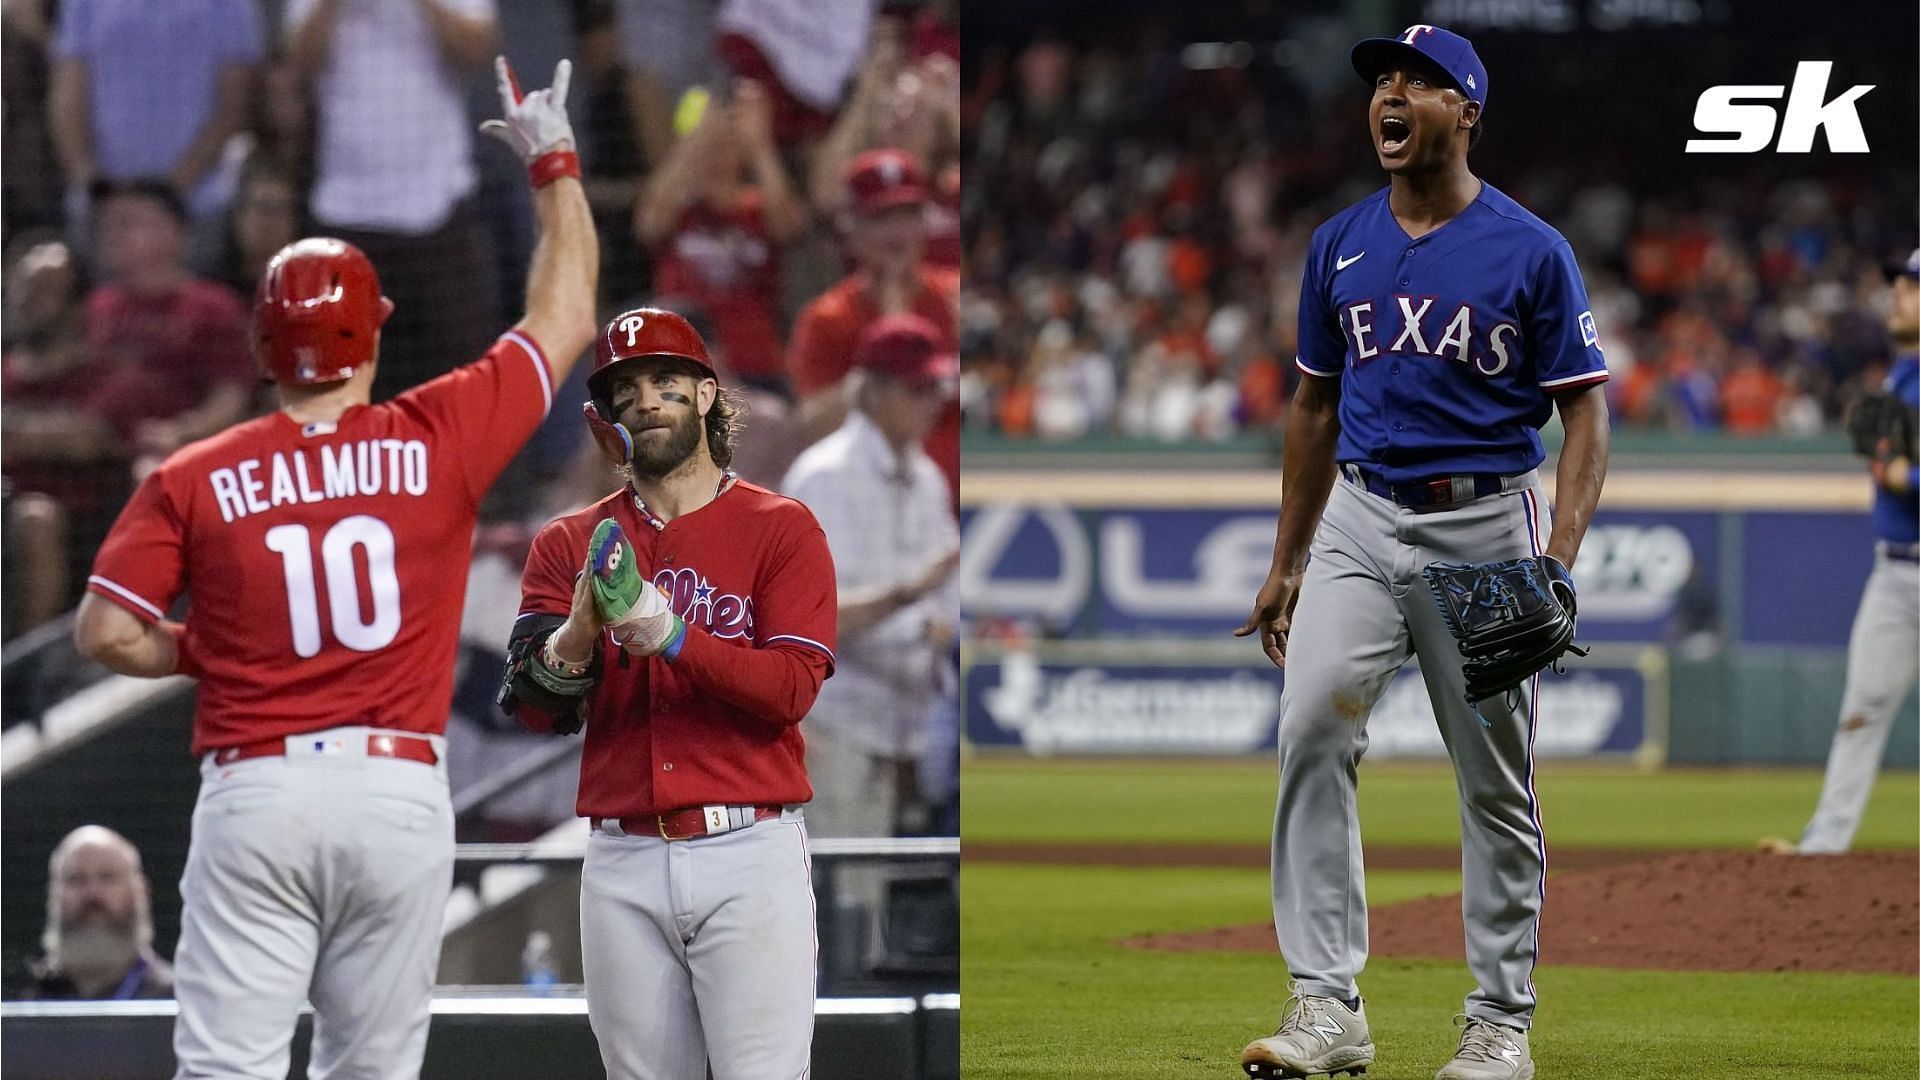 Home-field advantage could vary differently during the World Series depending on which teams advance